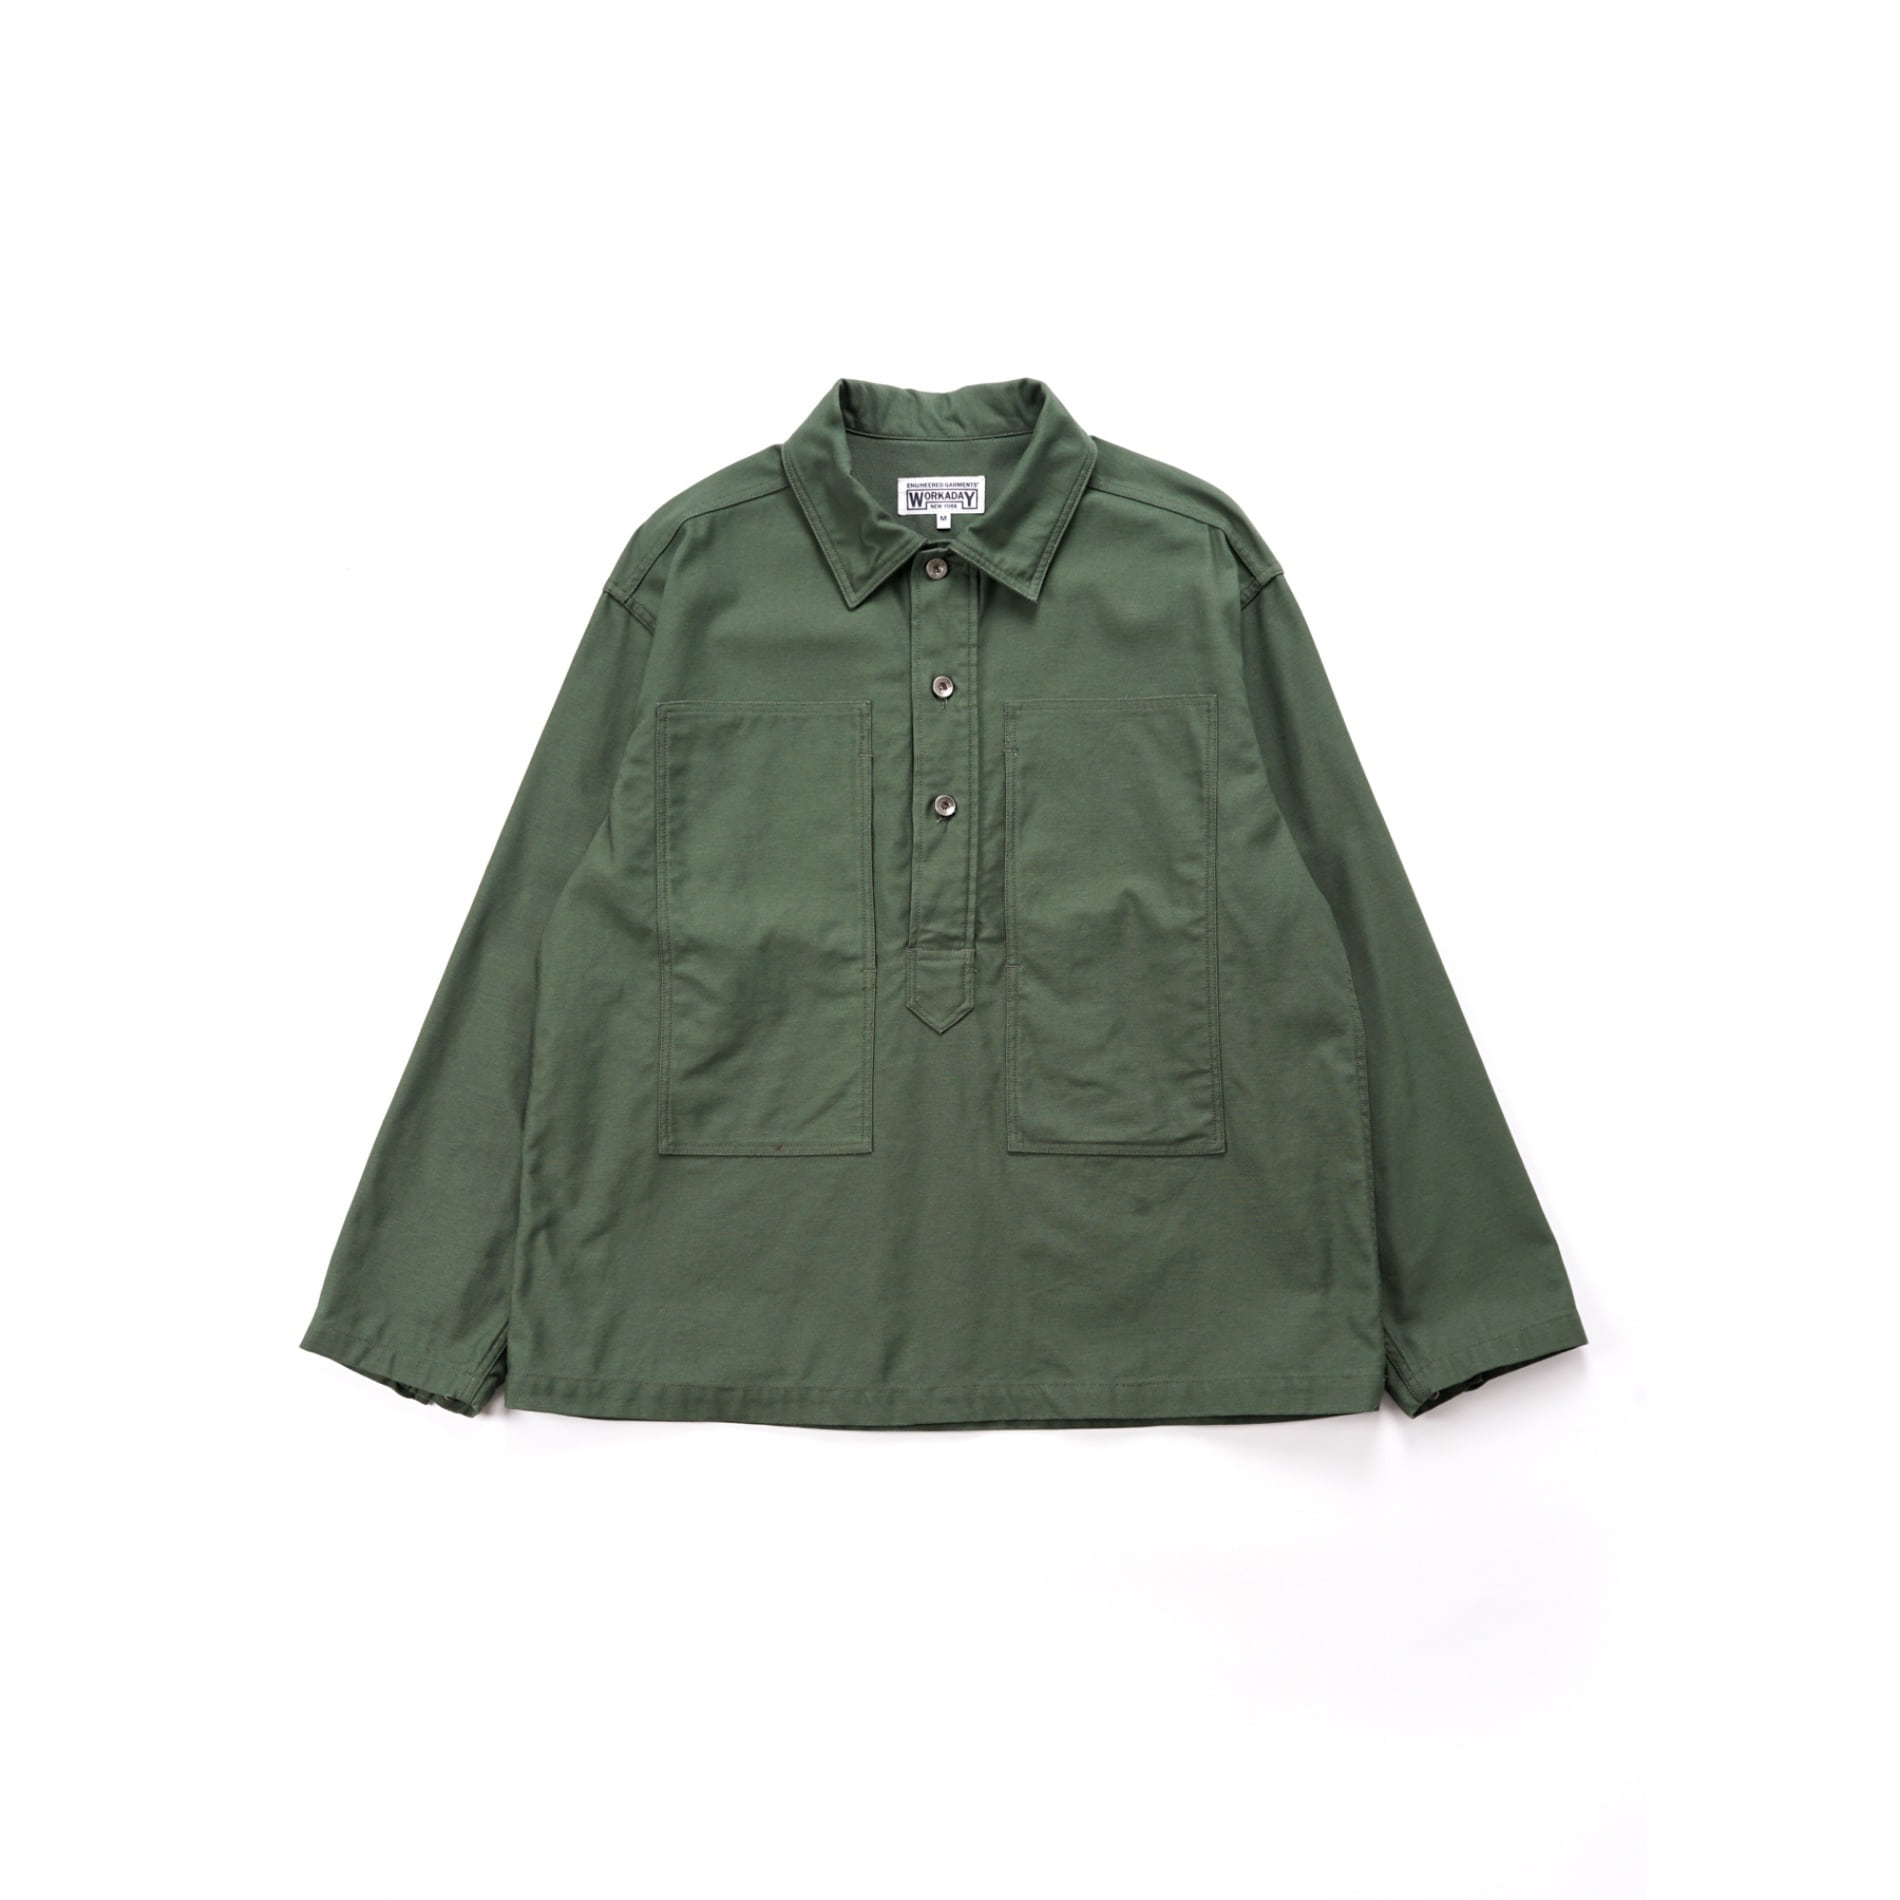 ENGINEERED GARMENTS WORKADAY ARMY SHIRT OLIVE COTTON REVERSE SATEEN